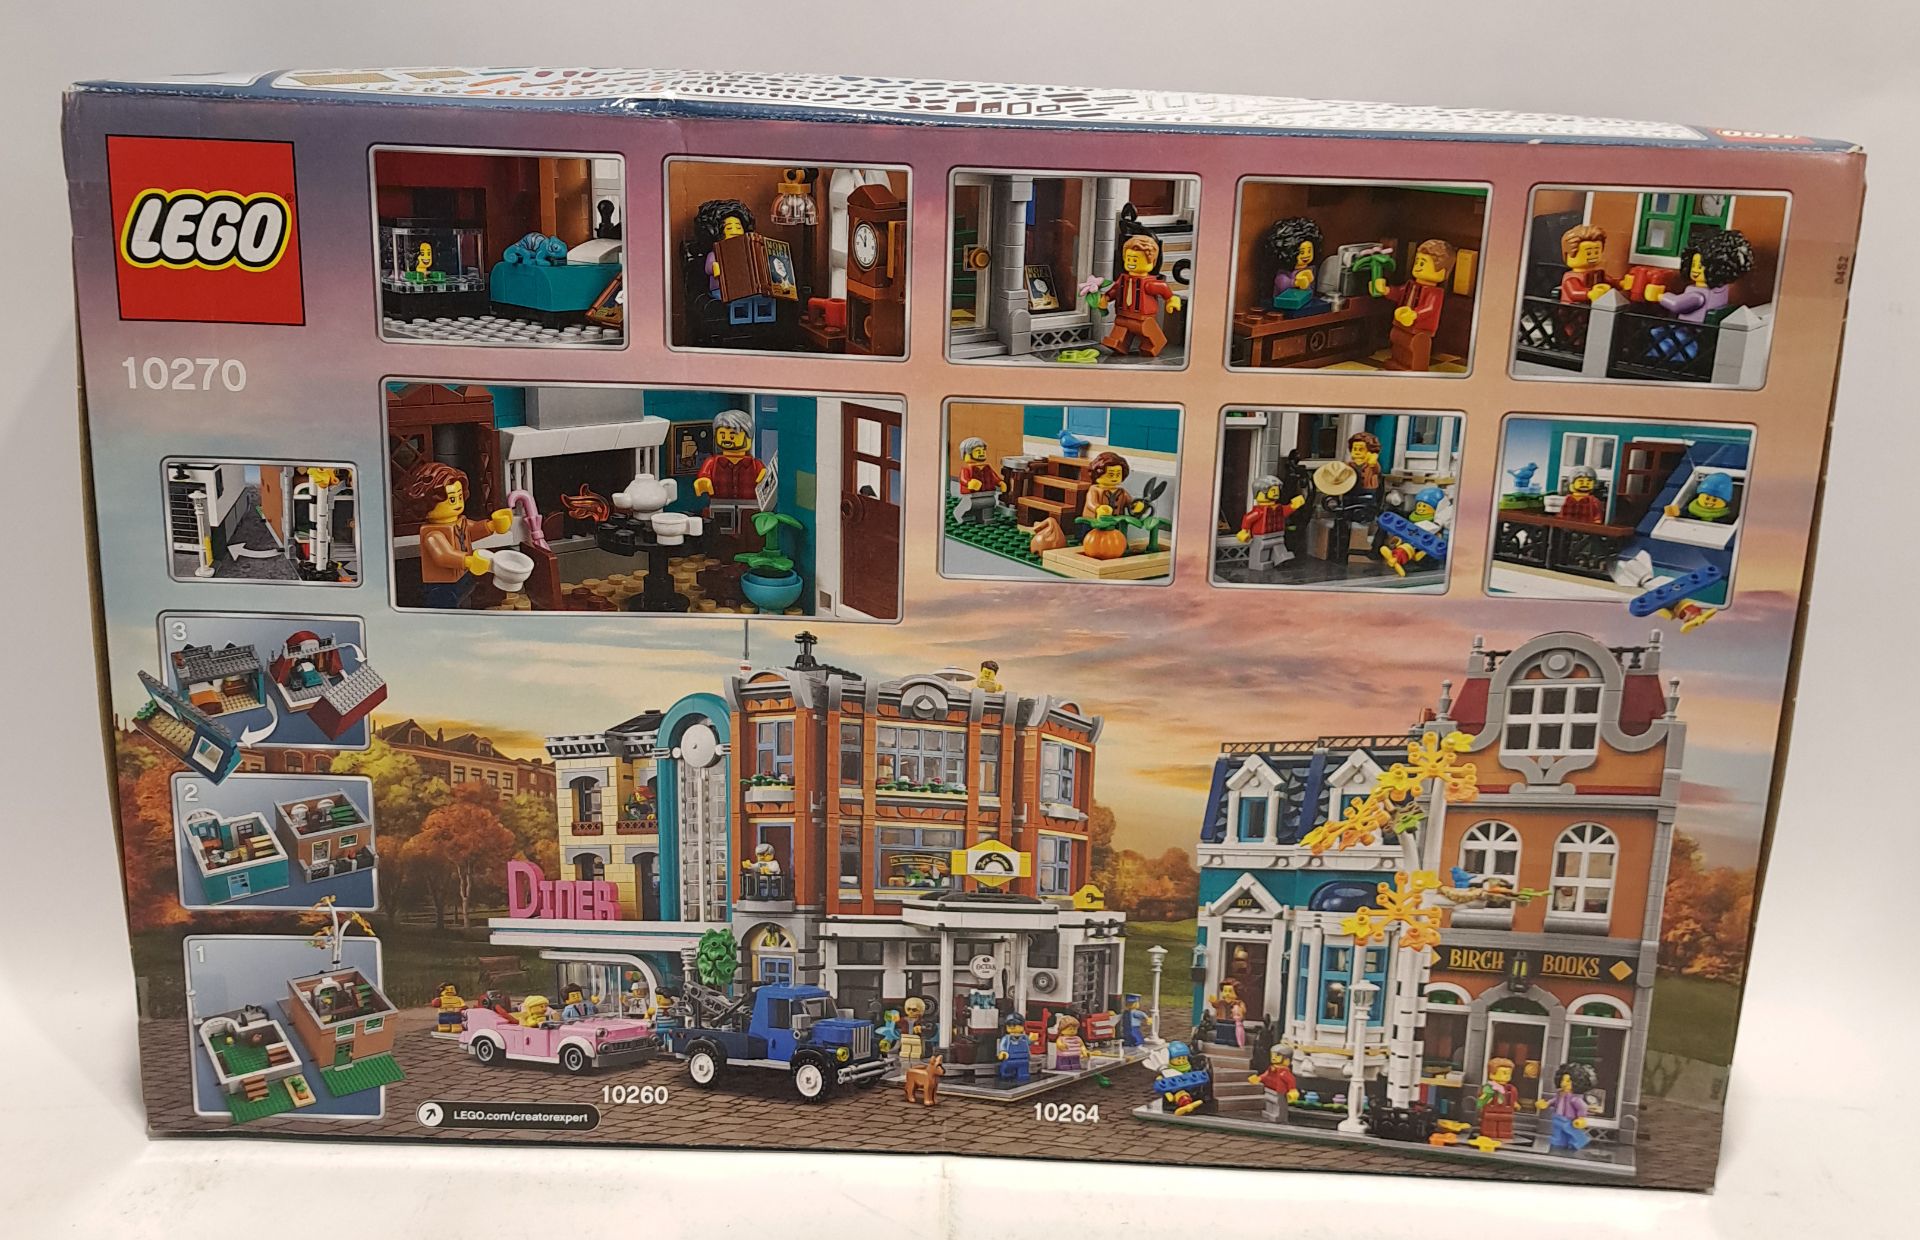 Lego Creator 10270 Bookshop- Modular Buildings Series within Excellent Plus to Near Mint Sealed P... - Image 2 of 2